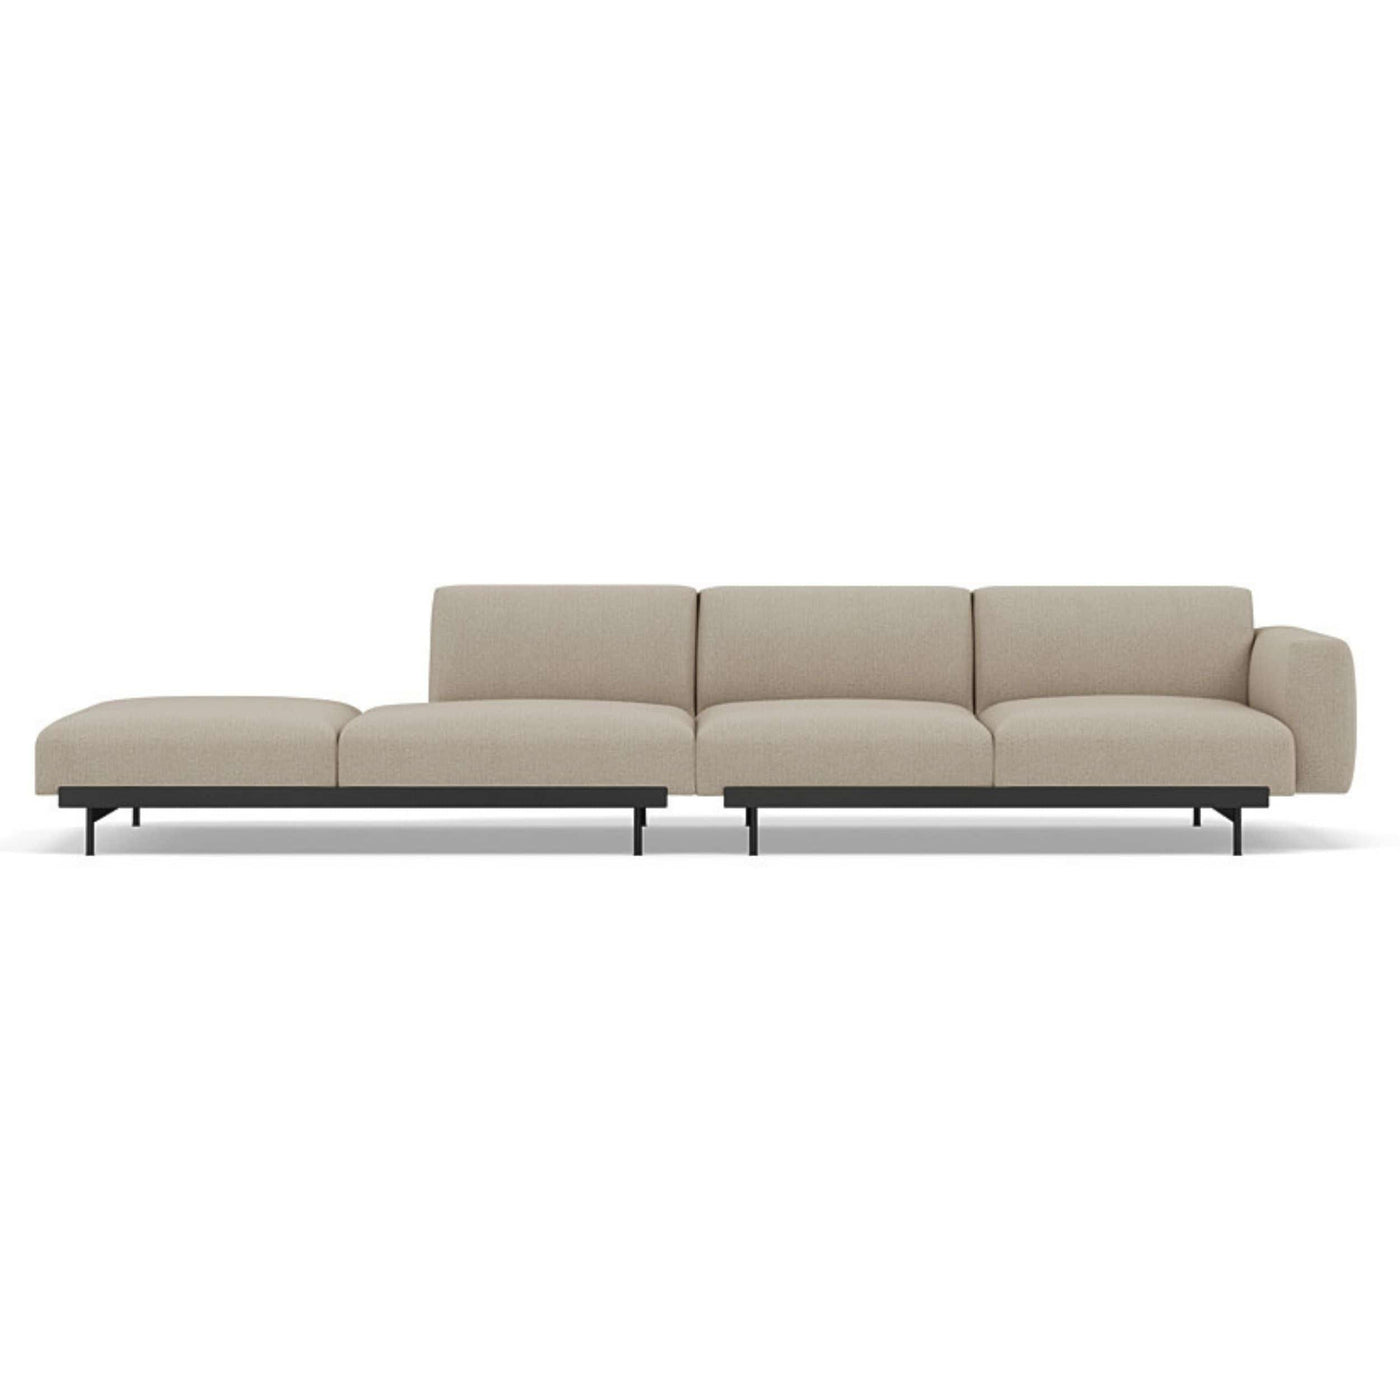 Muuto In Situ Modular 4 Seater Sofa configuration 3. Made to order from someday designs. #colour_clay-10